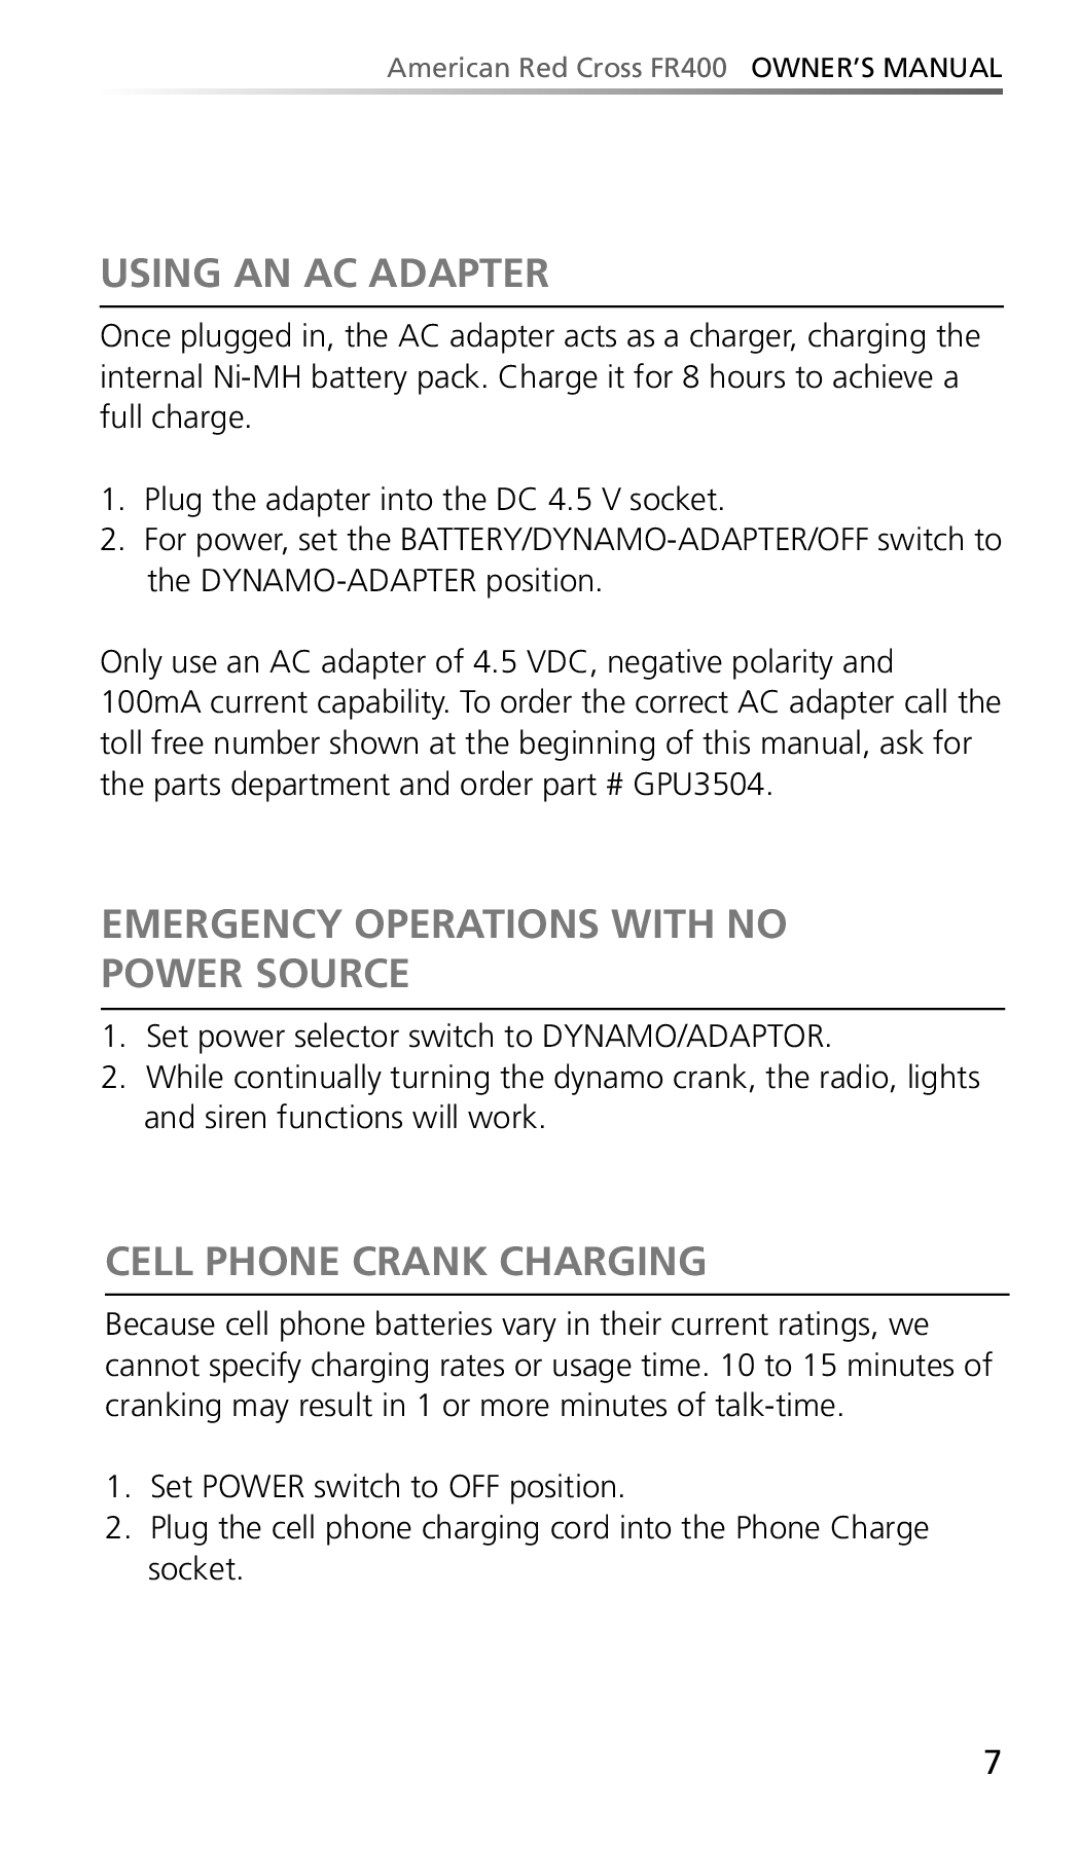 Eton FR400 owner manual Using AN AC Adapter, Emergency Operations with no Power Source, Cell Phone Crank Charging 